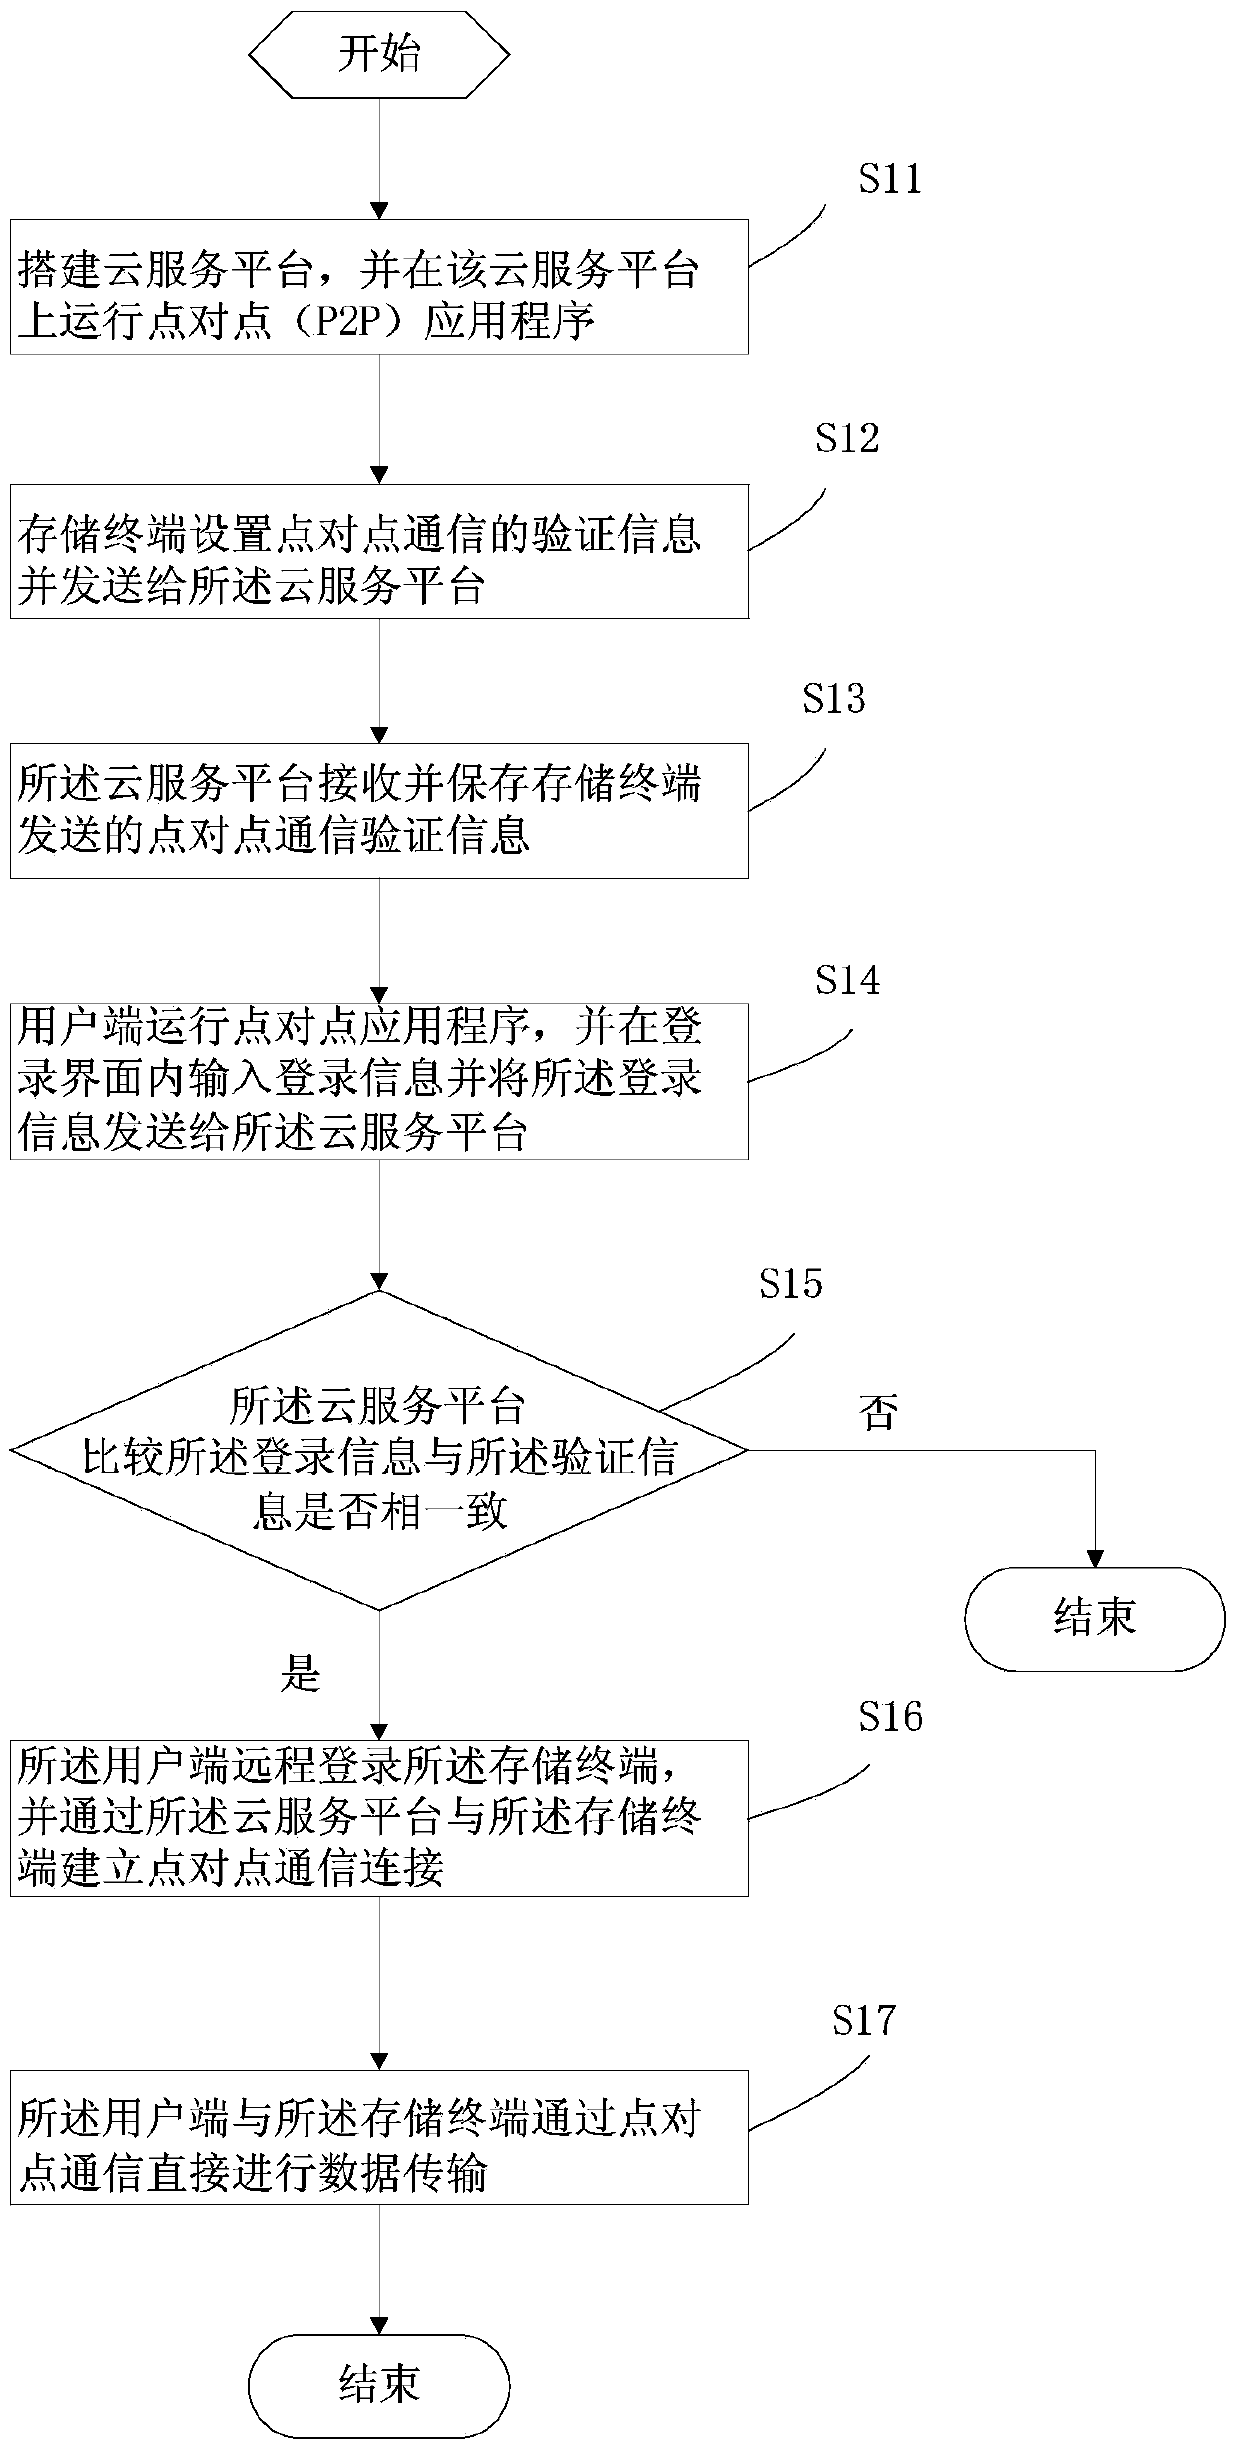 Method and system for having remote access to storage terminal based on cloud service platform